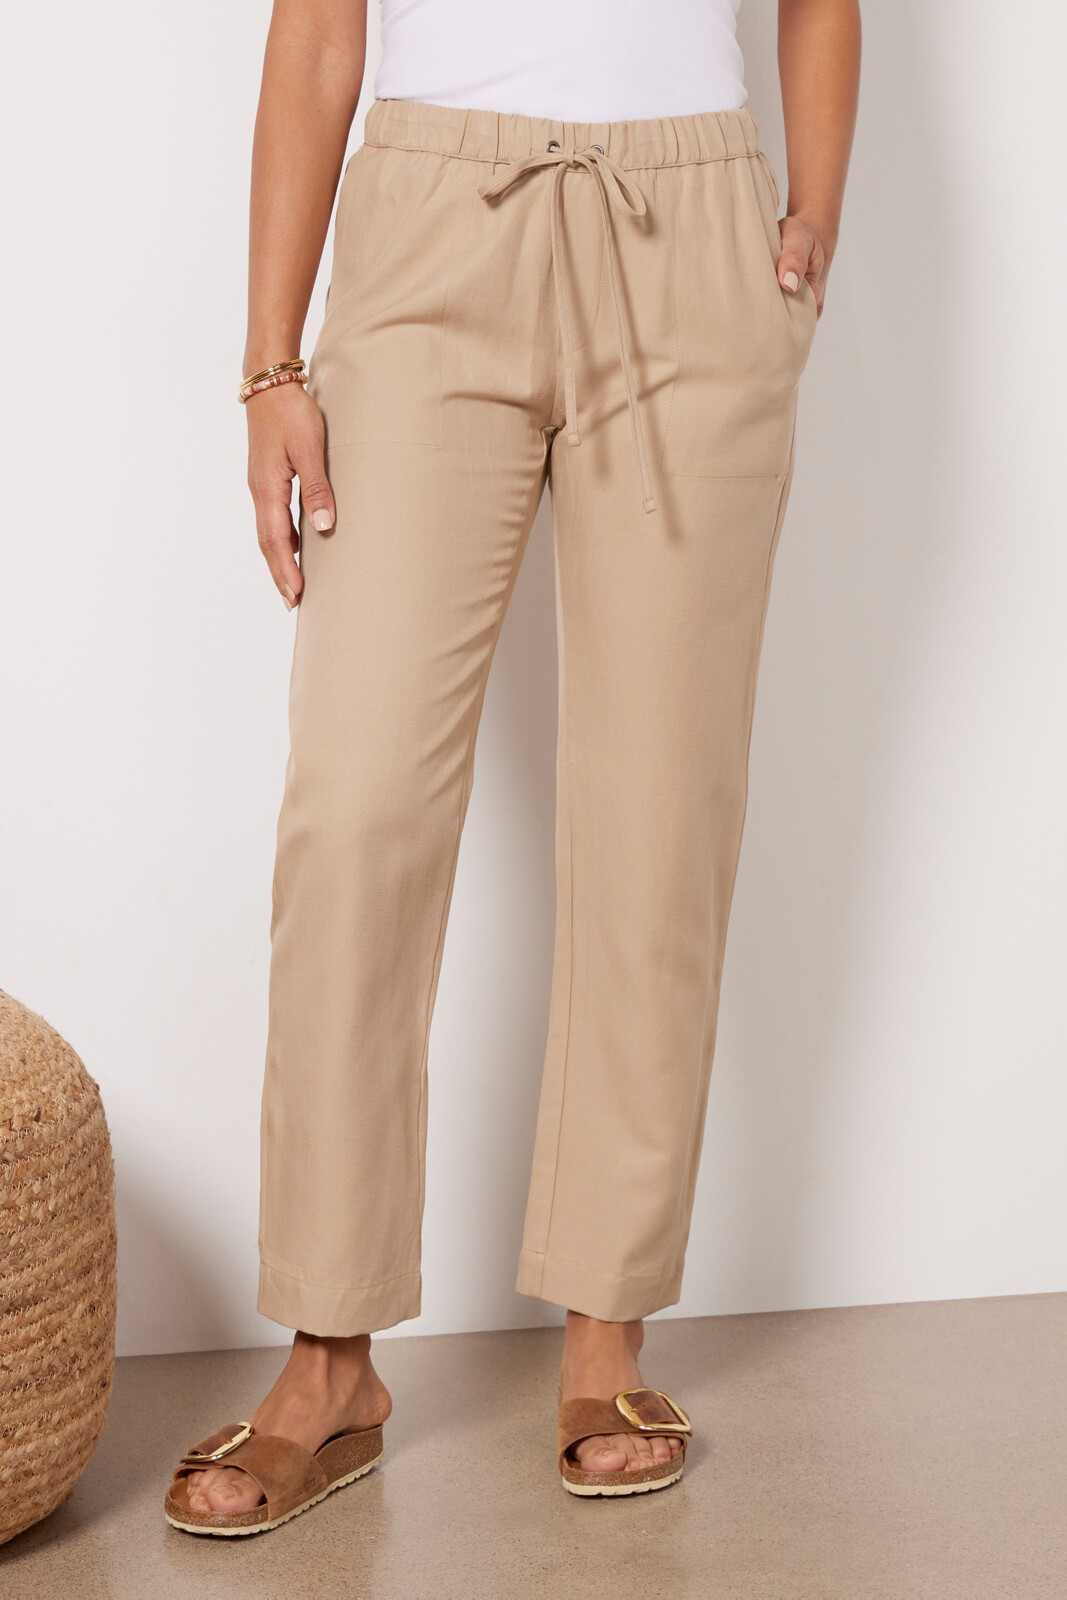 ENZA COSTA Twill Easy Pant | EVEREVE